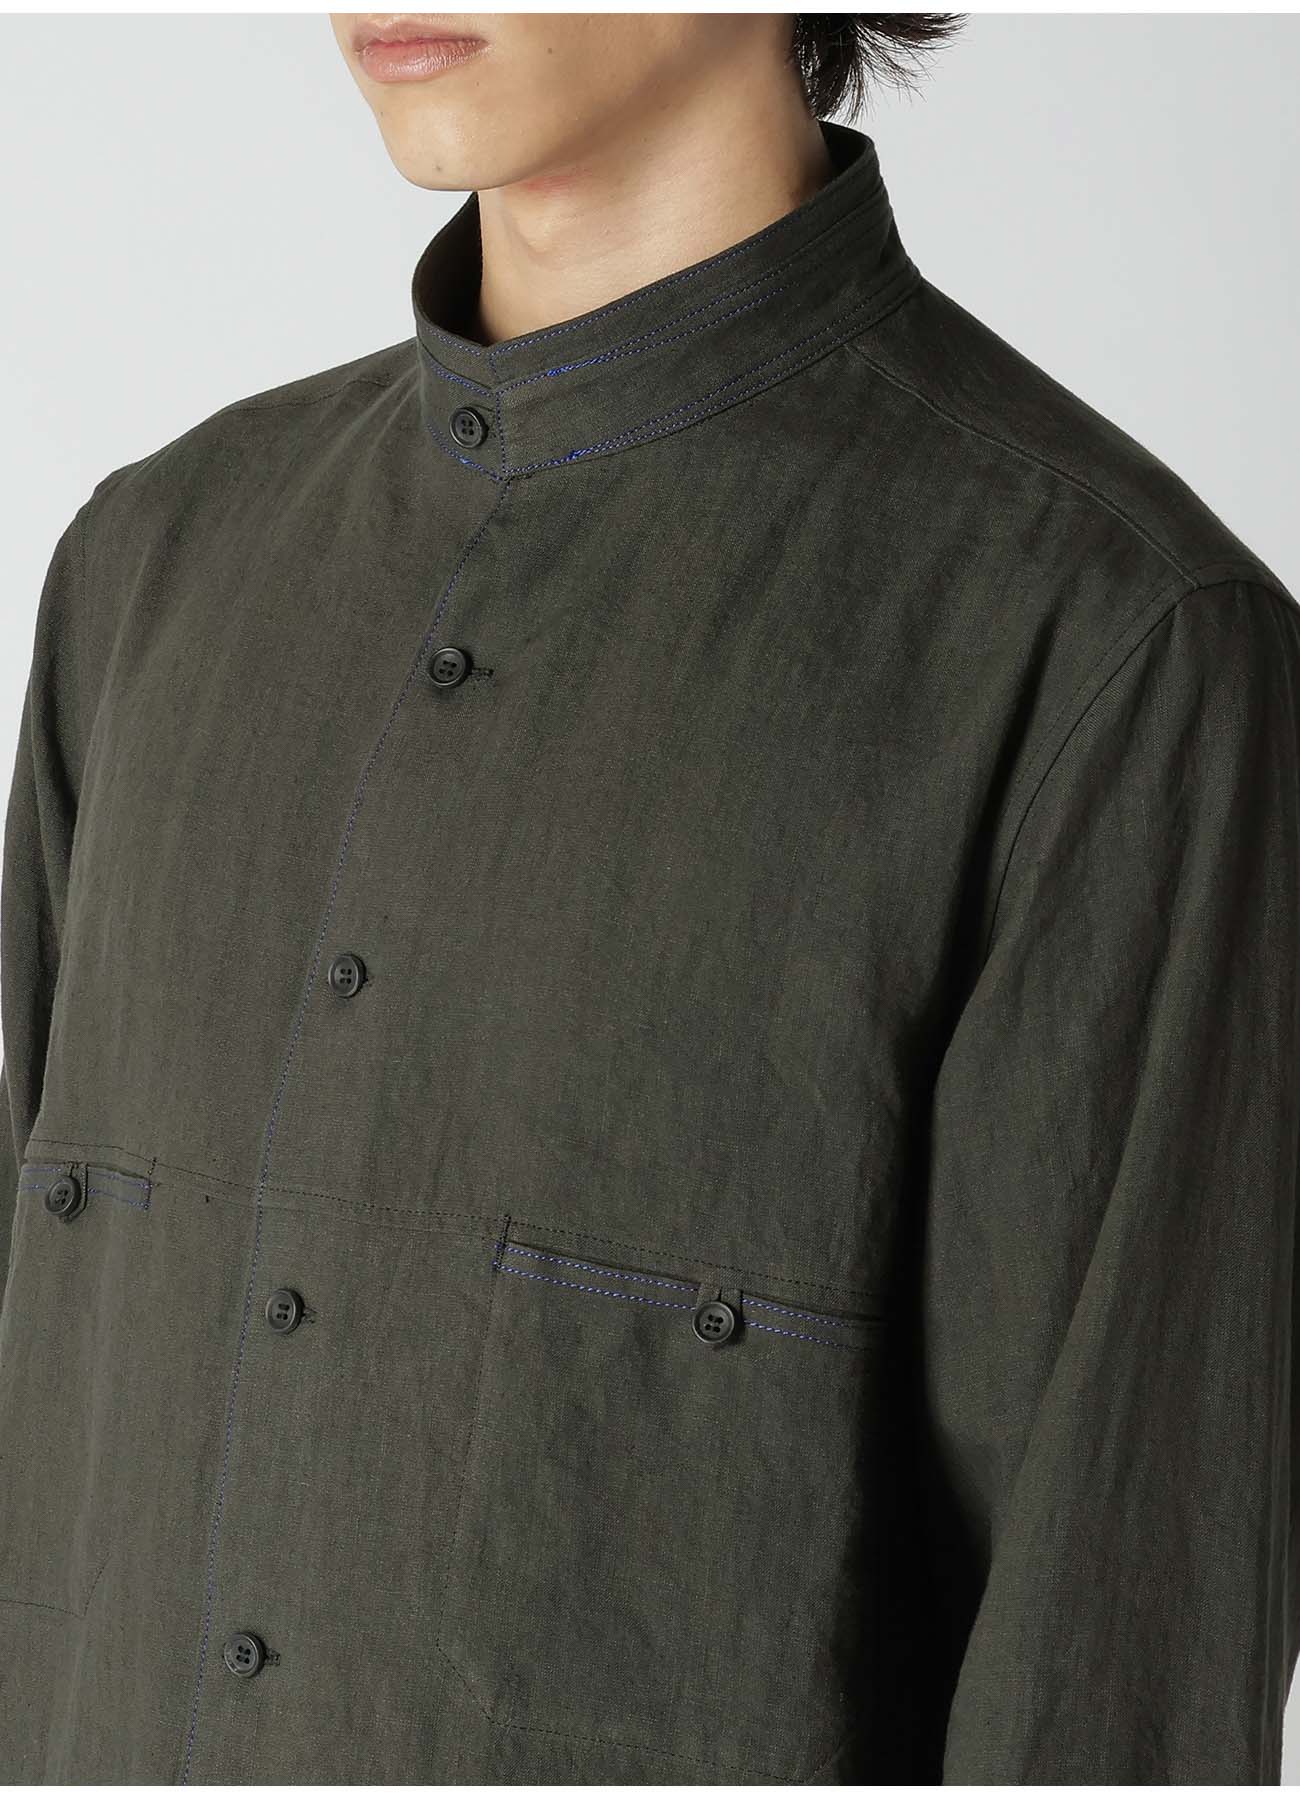 LINEN PAPER BROAD SHIRT WITH STAND COLLAR